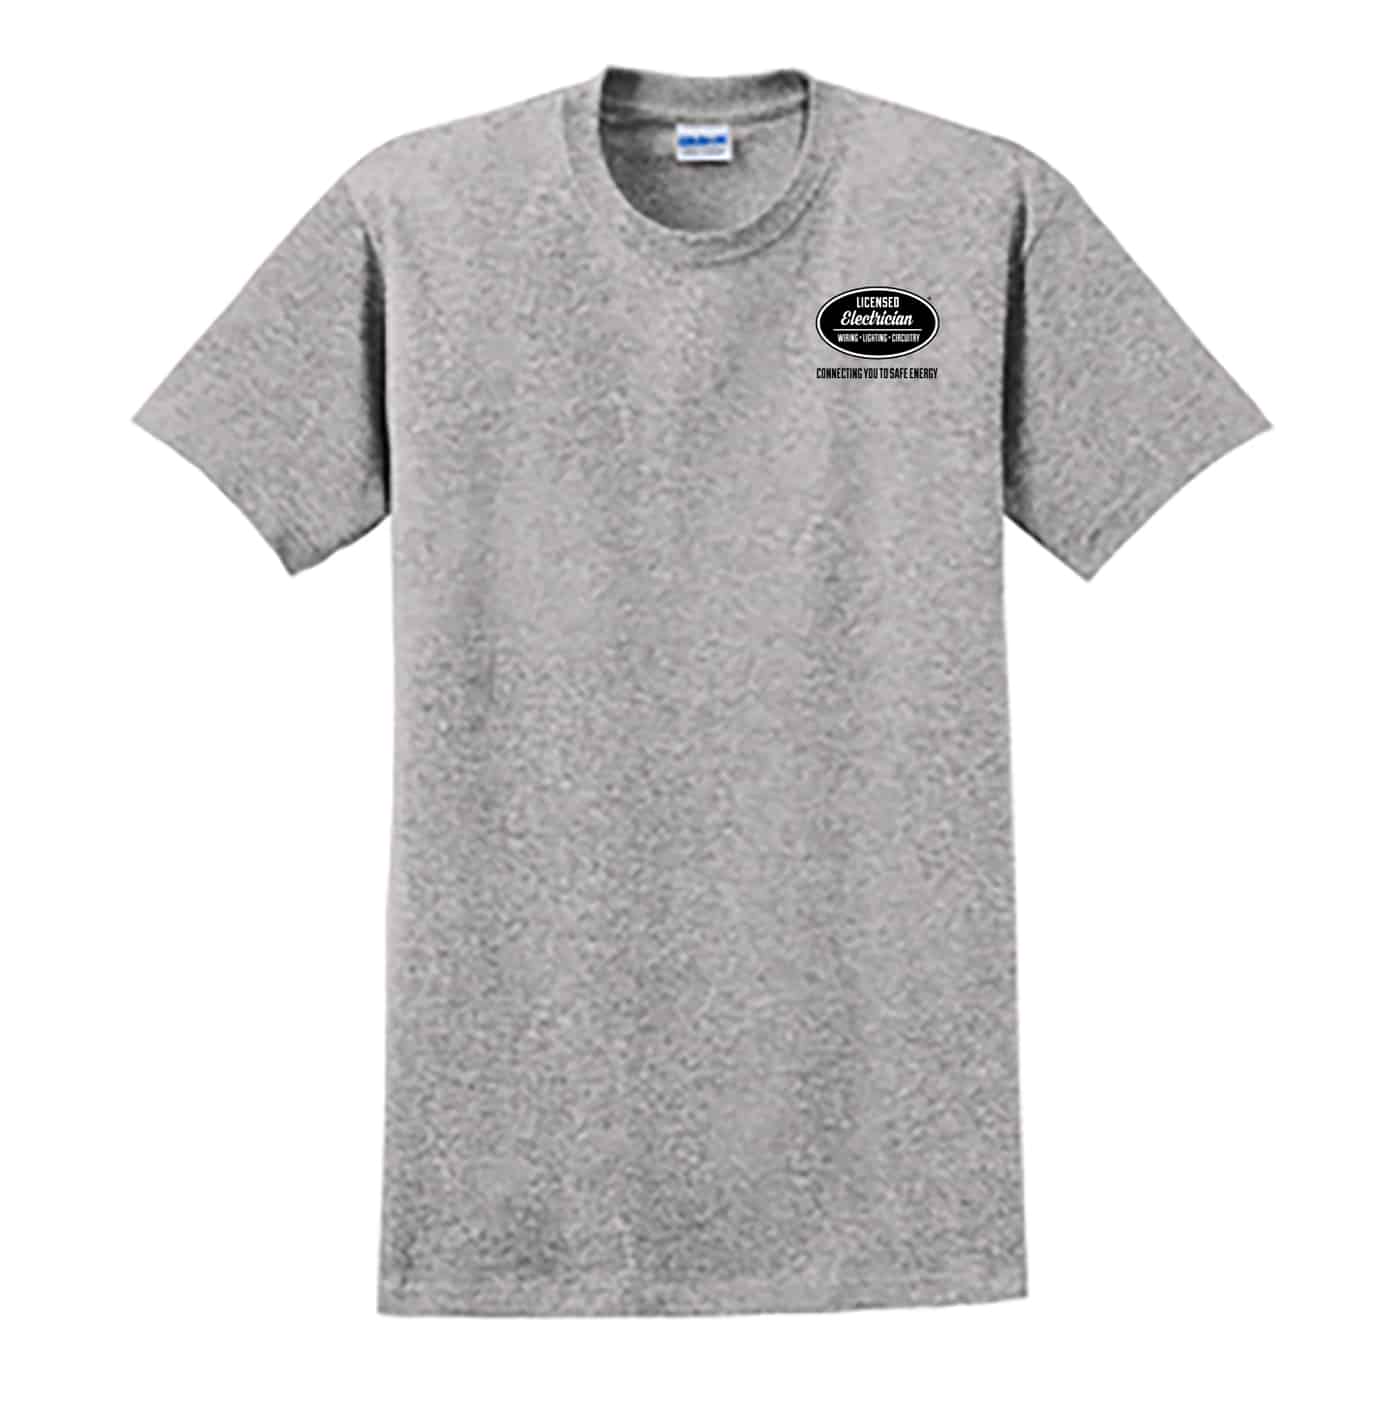 Licensed Electrician Short Sleeve T-Shirt | PHCEid Promotional